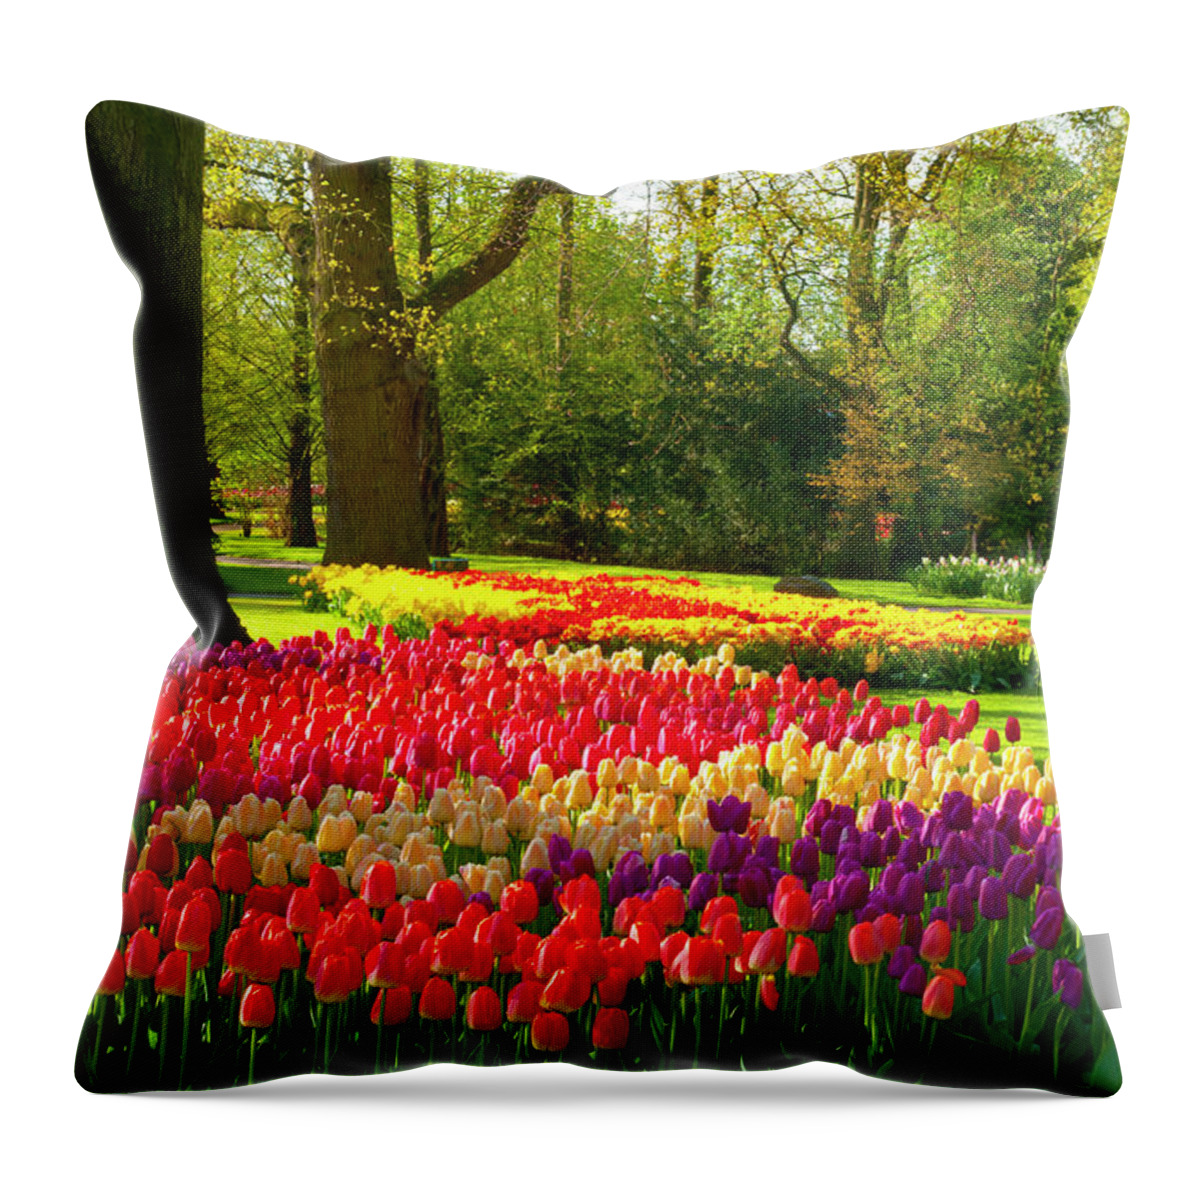 Flowerbed Throw Pillow featuring the photograph Spring Flowers In A Park #2 by Jacobh